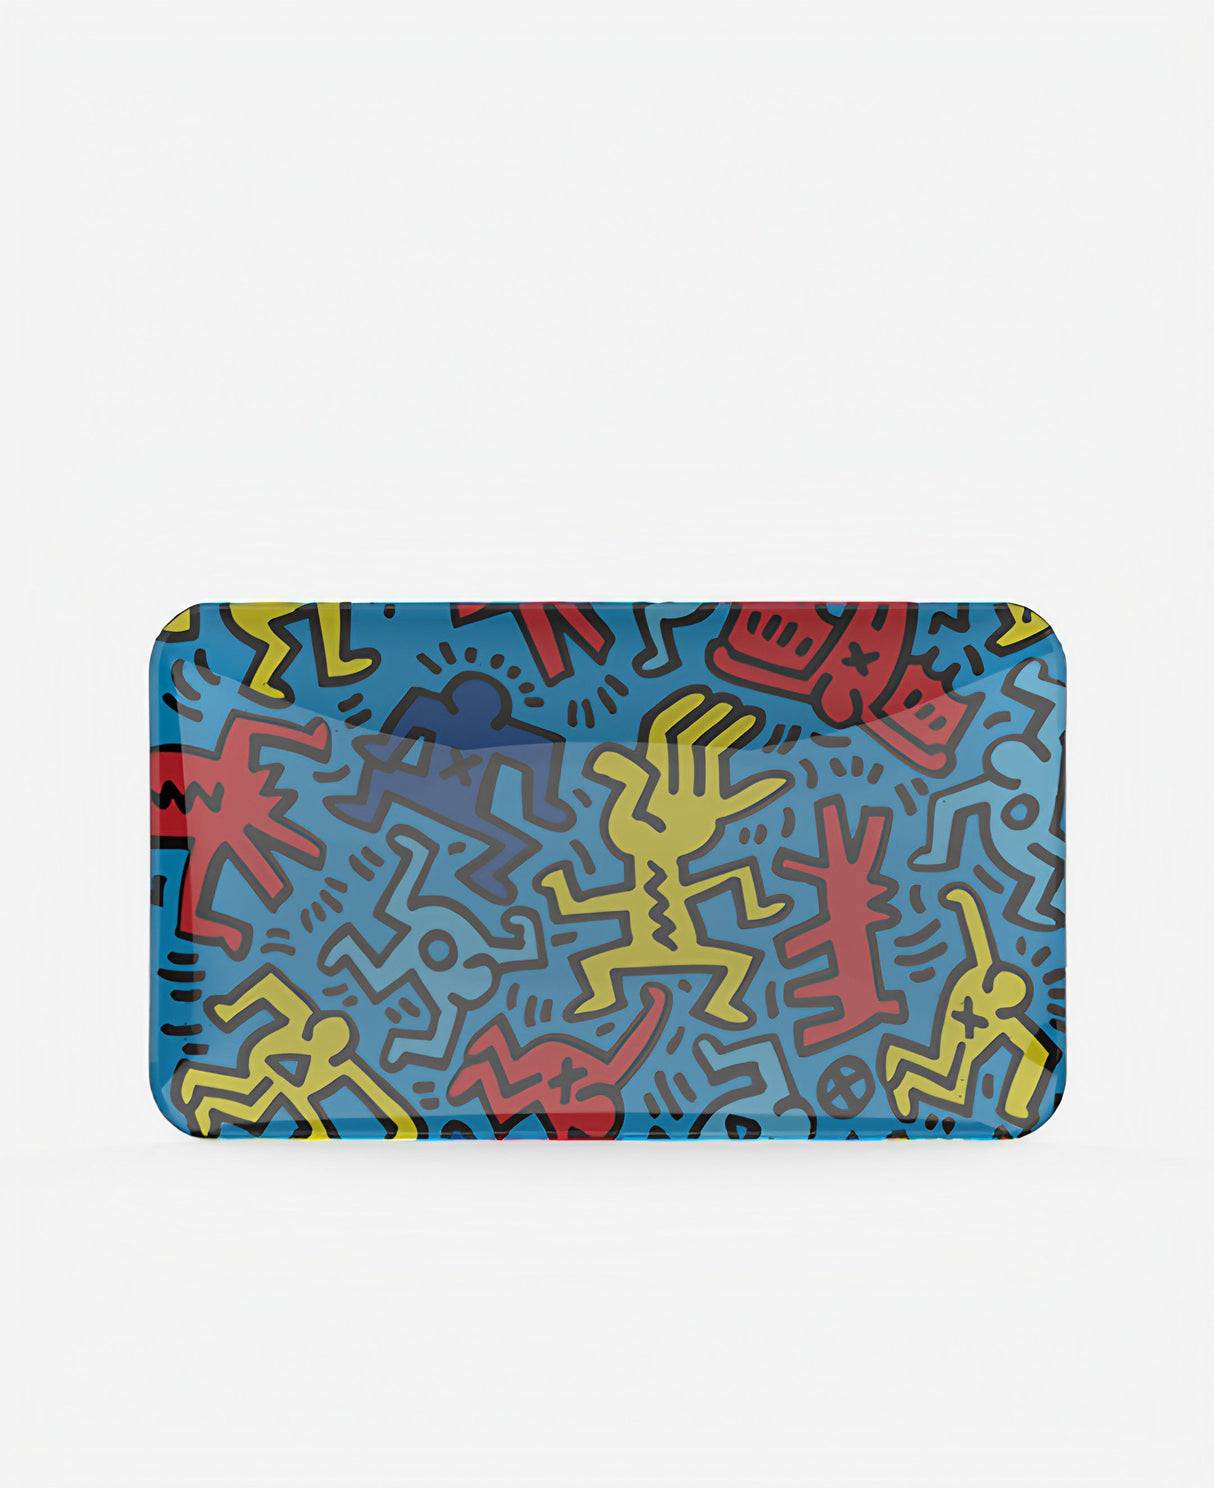 K.Haring Glass Collection rolling tray with vibrant art design, front view on white background